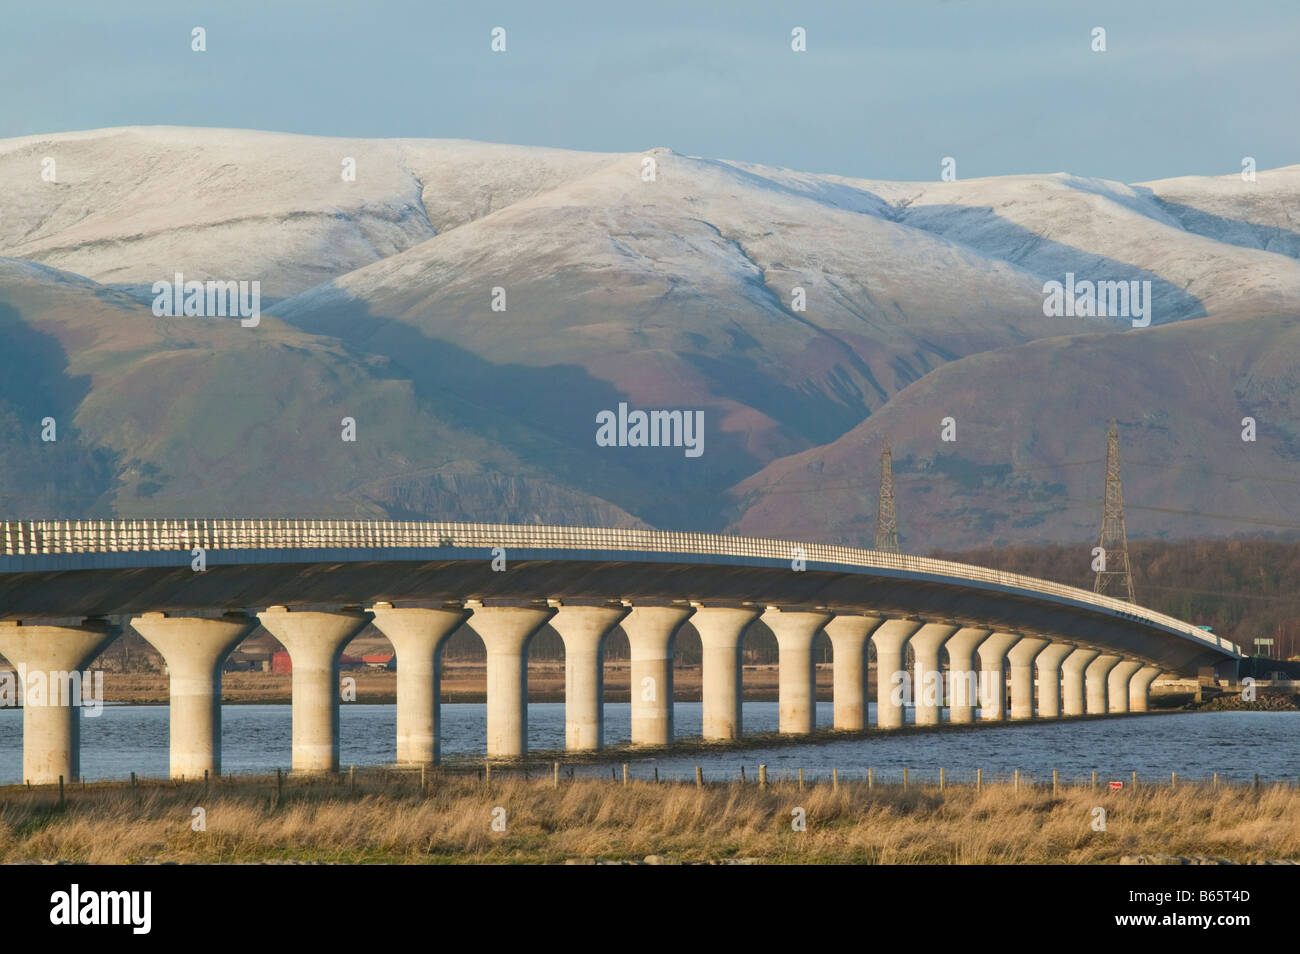 The Clackmannanshire Bridge across the Firth of Forth, Scotland, UK. Stock Photo